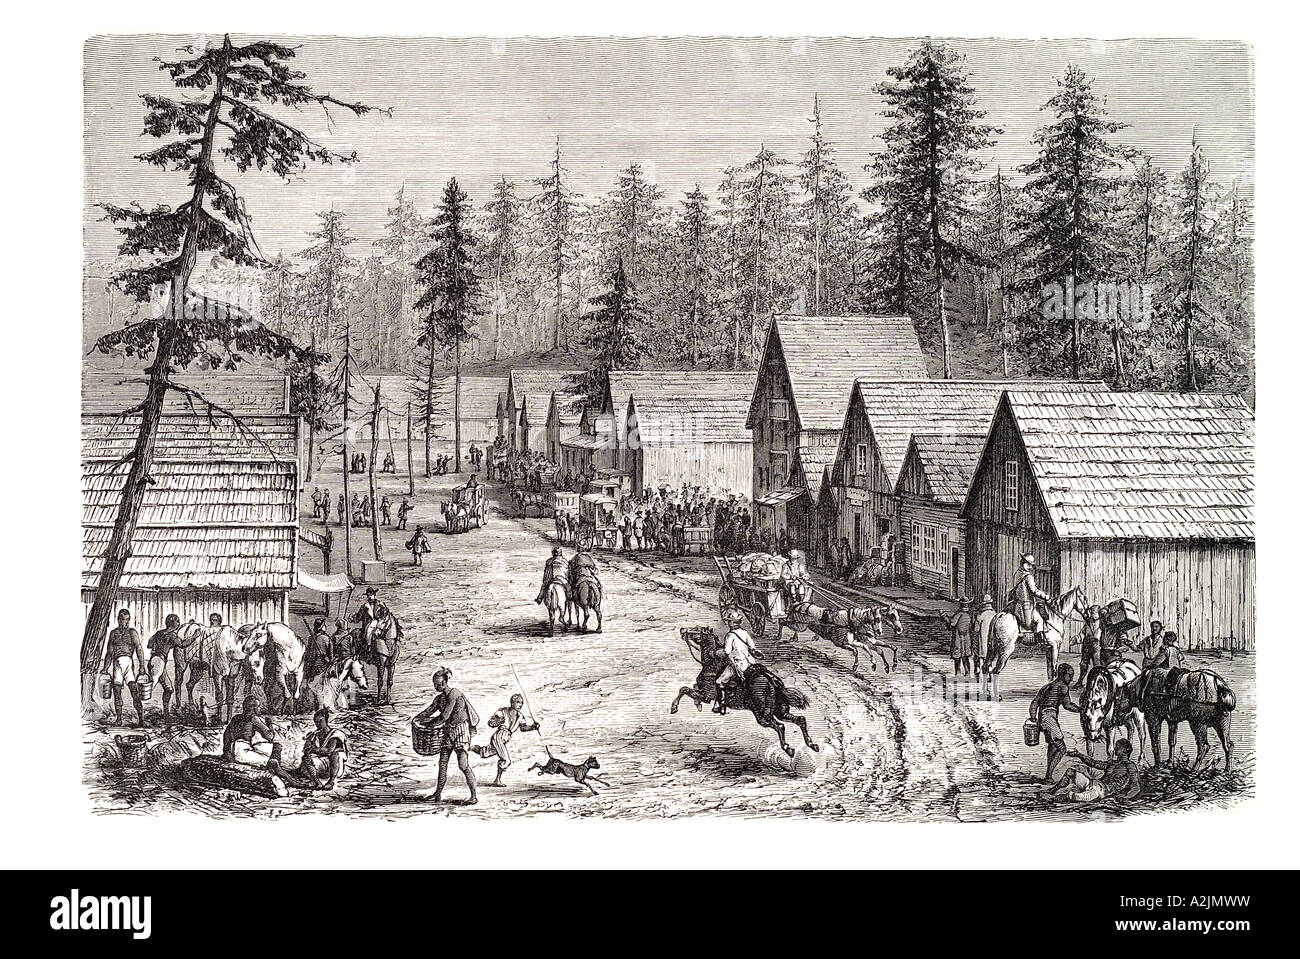 Timber board log house cabin street wild west USA Forest Mountain horse dog wagon settle main rocky mountain trade trader Stock Photo